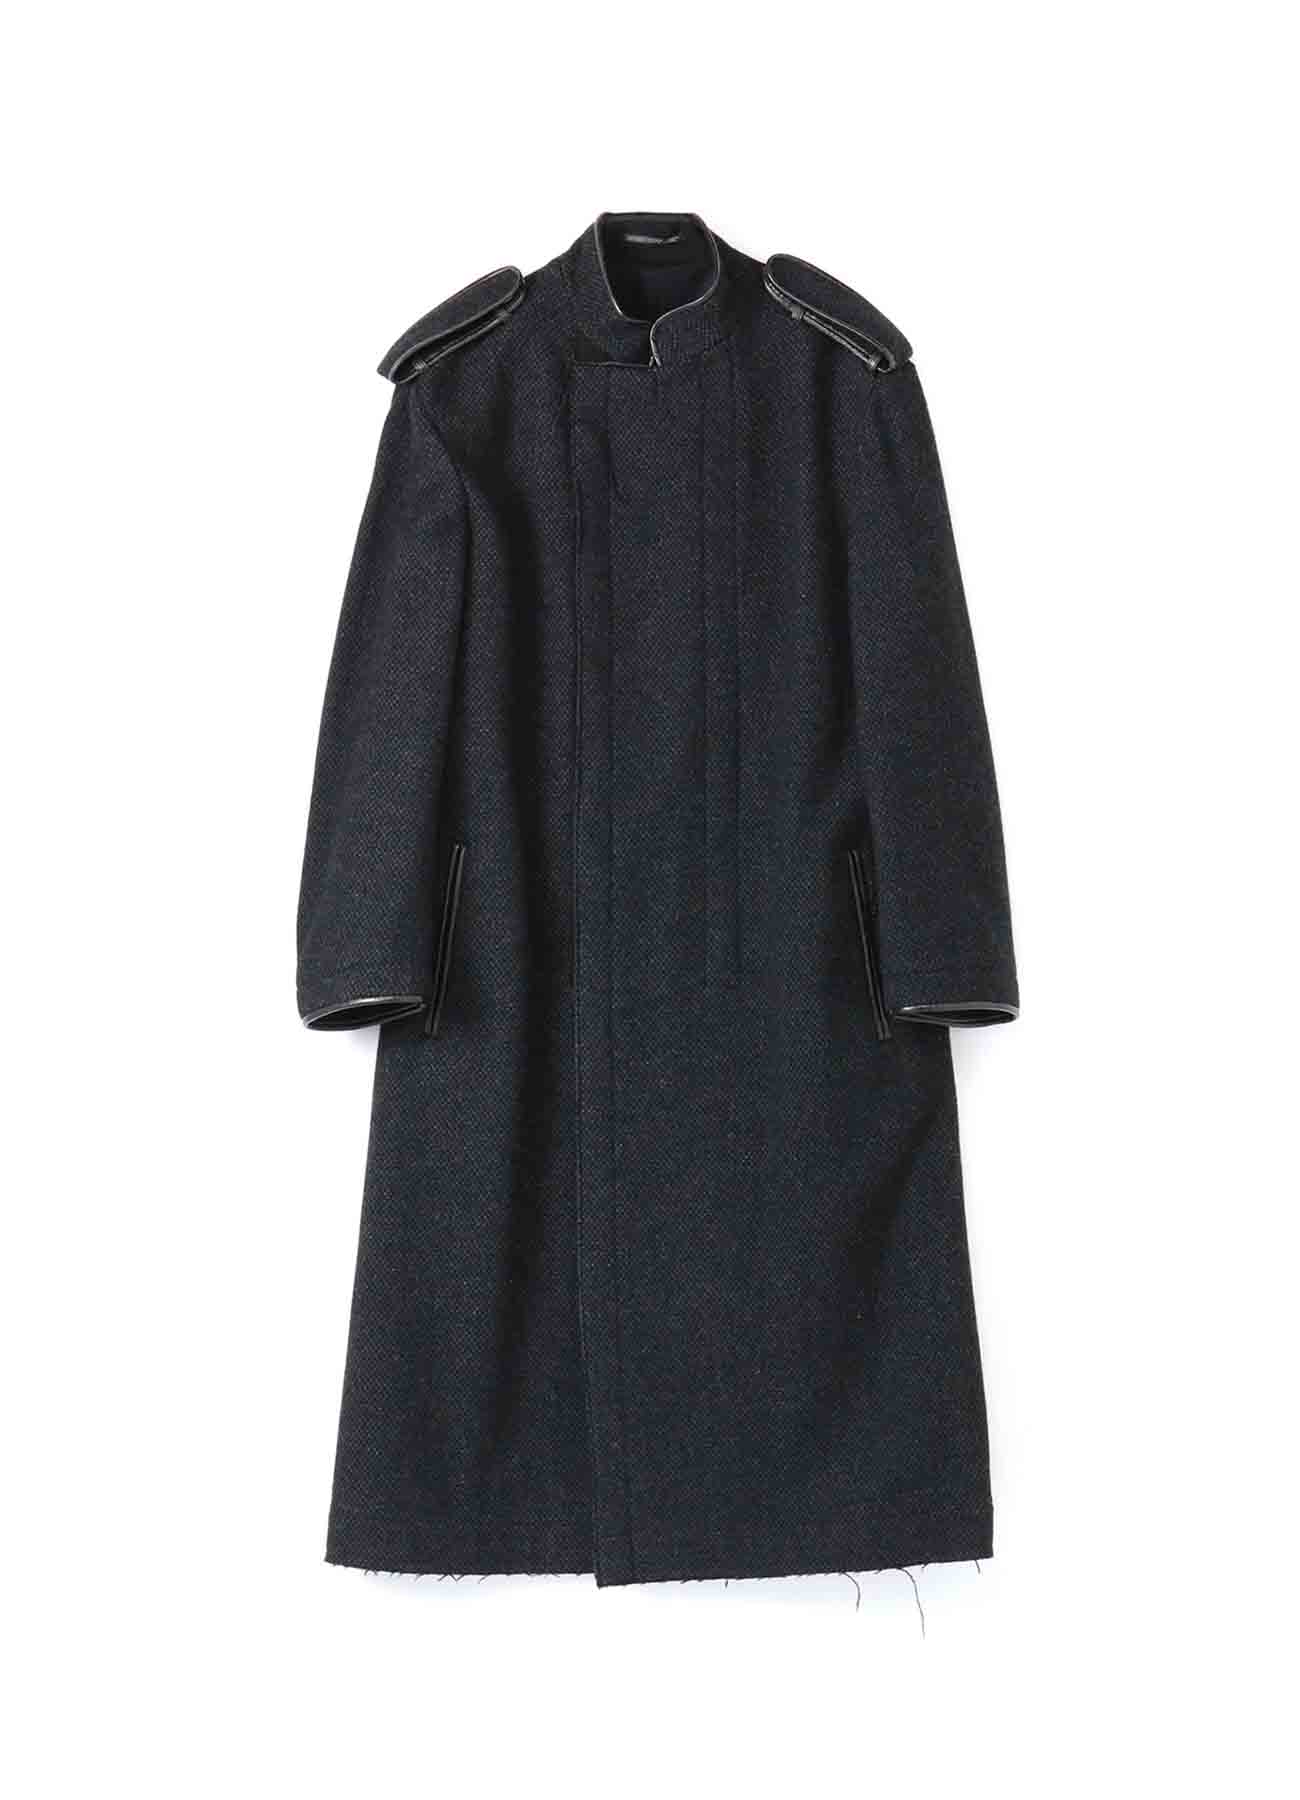 DOBBY TWEED LEATHER PIPING STAND COAT